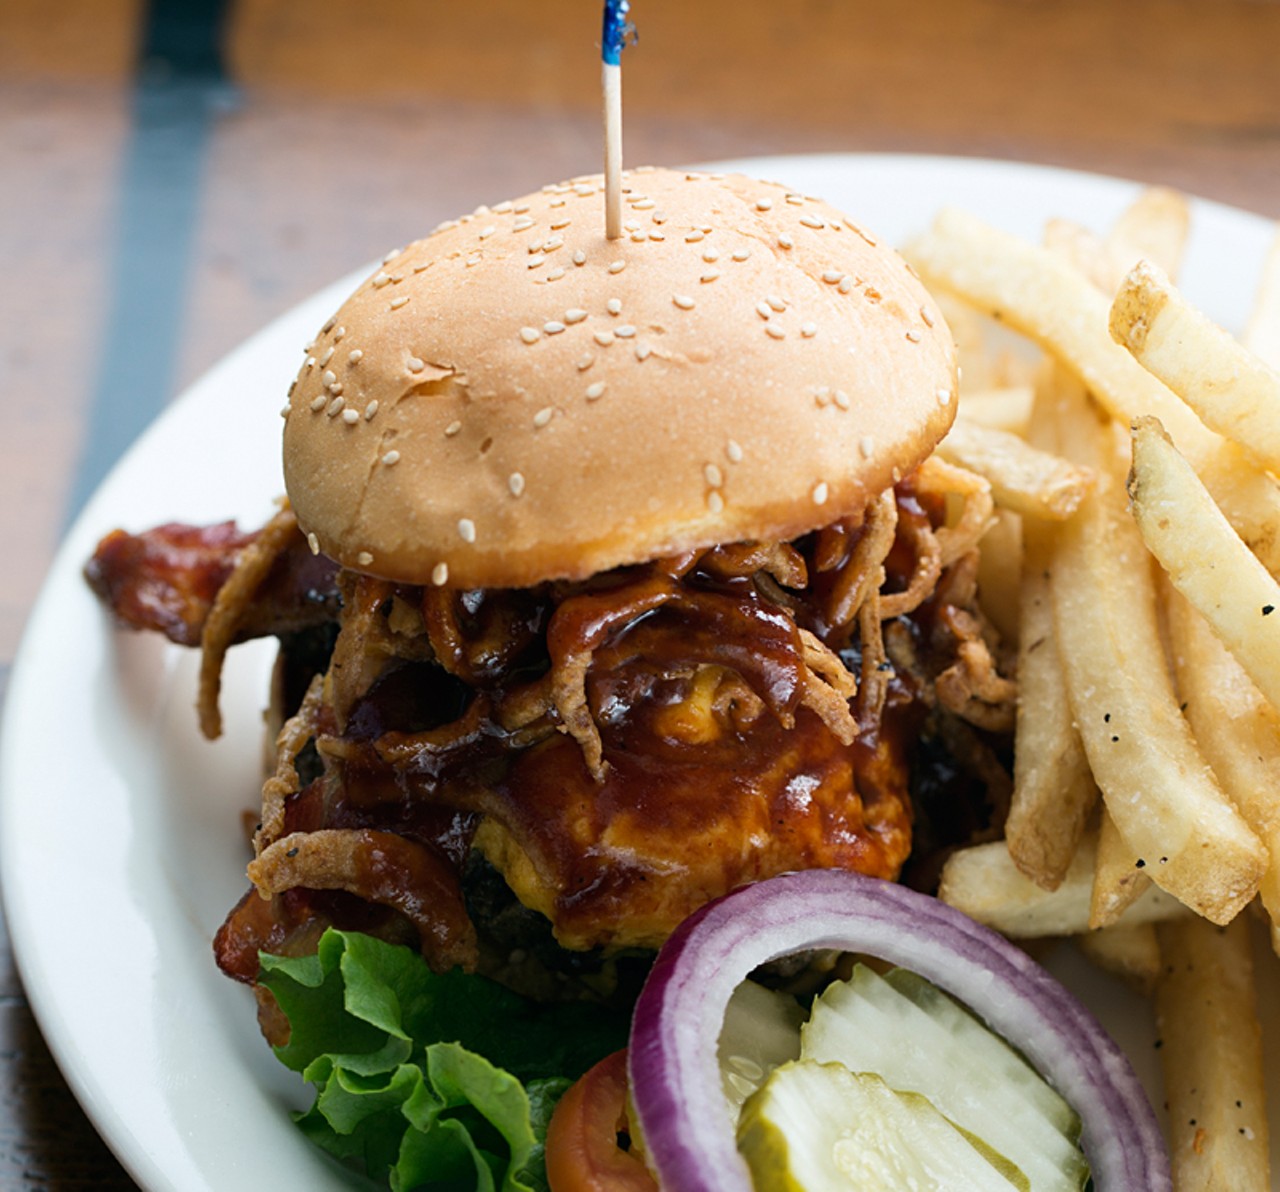 The "Smokehouse Burger" is a half-pound patty topped with soft cheddar, Billy's barbecue  sauce, bacon and onion straws on a butter kaiser roll.